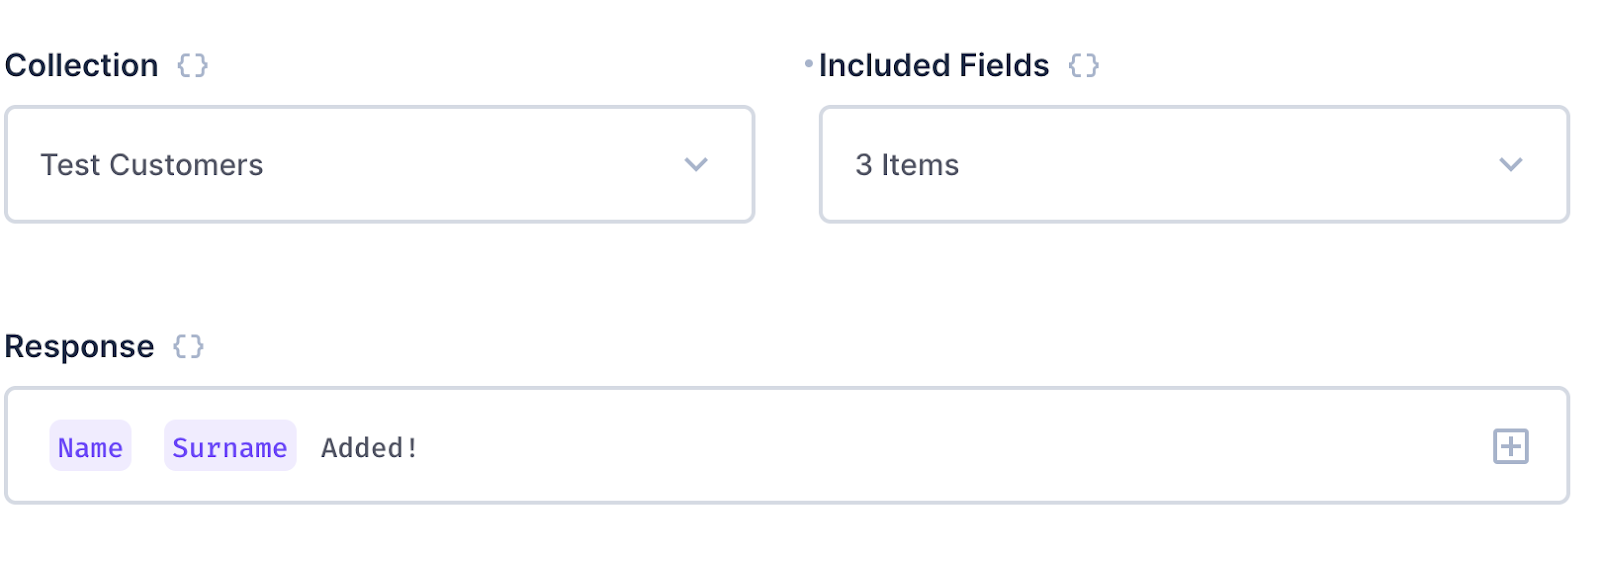 Form showing a collection is selected, 3 items are included, and a response is formed as a string with two dynamic variables.